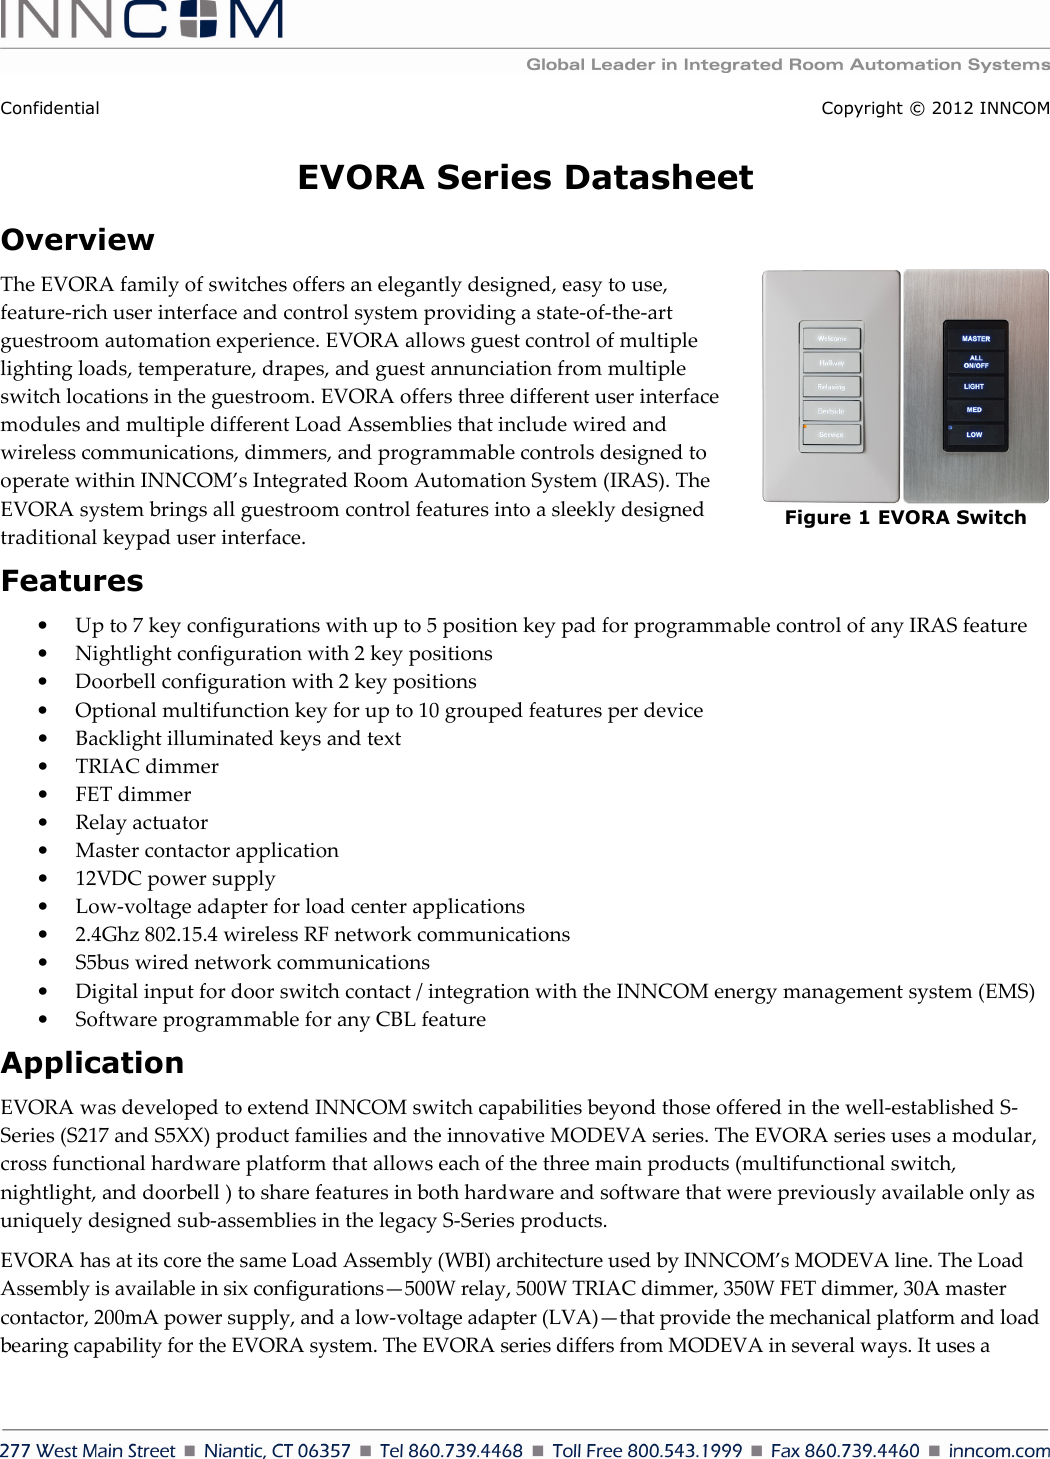    Confidential Copyright © 2012 INNCOM EVORA Series Datasheet Overview  The EVORA family of switches offers an elegantly designed, easy to use, feature-rich user interface and control system providing a state-of-the-art guestroom automation experience. EVORA allows guest control of multiple lighting loads, temperature, drapes, and guest annunciation from multiple switch locations in the guestroom. EVORA offers three different user interface modules and multiple different Load Assemblies that include wired and wireless communications, dimmers, and programmable controls designed to operate within INNCOM’s Integrated Room Automation System (IRAS). The EVORA system brings all guestroom control features into a sleekly designed traditional keypad user interface. Features • Up to 7 key configurations with up to 5 position key pad for programmable control of any IRAS feature • Nightlight configuration with 2 key positions  • Doorbell configuration with 2 key positions  • Optional multifunction key for up to 10 grouped features per device • Backlight illuminated keys and text • TRIAC dimmer • FET dimmer • Relay actuator • Master contactor application • 12VDC power supply • Low-voltage adapter for load center applications • 2.4Ghz 802.15.4 wireless RF network communications • S5bus wired network communications • Digital input for door switch contact / integration with the INNCOM energy management system (EMS)  • Software programmable for any CBL feature Application EVORA was developed to extend INNCOM switch capabilities beyond those offered in the well-established S-Series (S217 and S5XX) product families and the innovative MODEVA series. The EVORA series uses a modular, cross functional hardware platform that allows each of the three main products (multifunctional switch, nightlight, and doorbell ) to share features in both hardware and software that were previously available only as uniquely designed sub-assemblies in the legacy S-Series products.  EVORA has at its core the same Load Assembly (WBI) architecture used by INNCOM’s MODEVA line. The Load Assembly is available in six configurations—500W relay, 500W TRIAC dimmer, 350W FET dimmer, 30A master contactor, 200mA power supply, and a low-voltage adapter (LVA)—that provide the mechanical platform and load bearing capability for the EVORA system. The EVORA series differs from MODEVA in several ways. It uses a Figure 1 EVORA Switch 